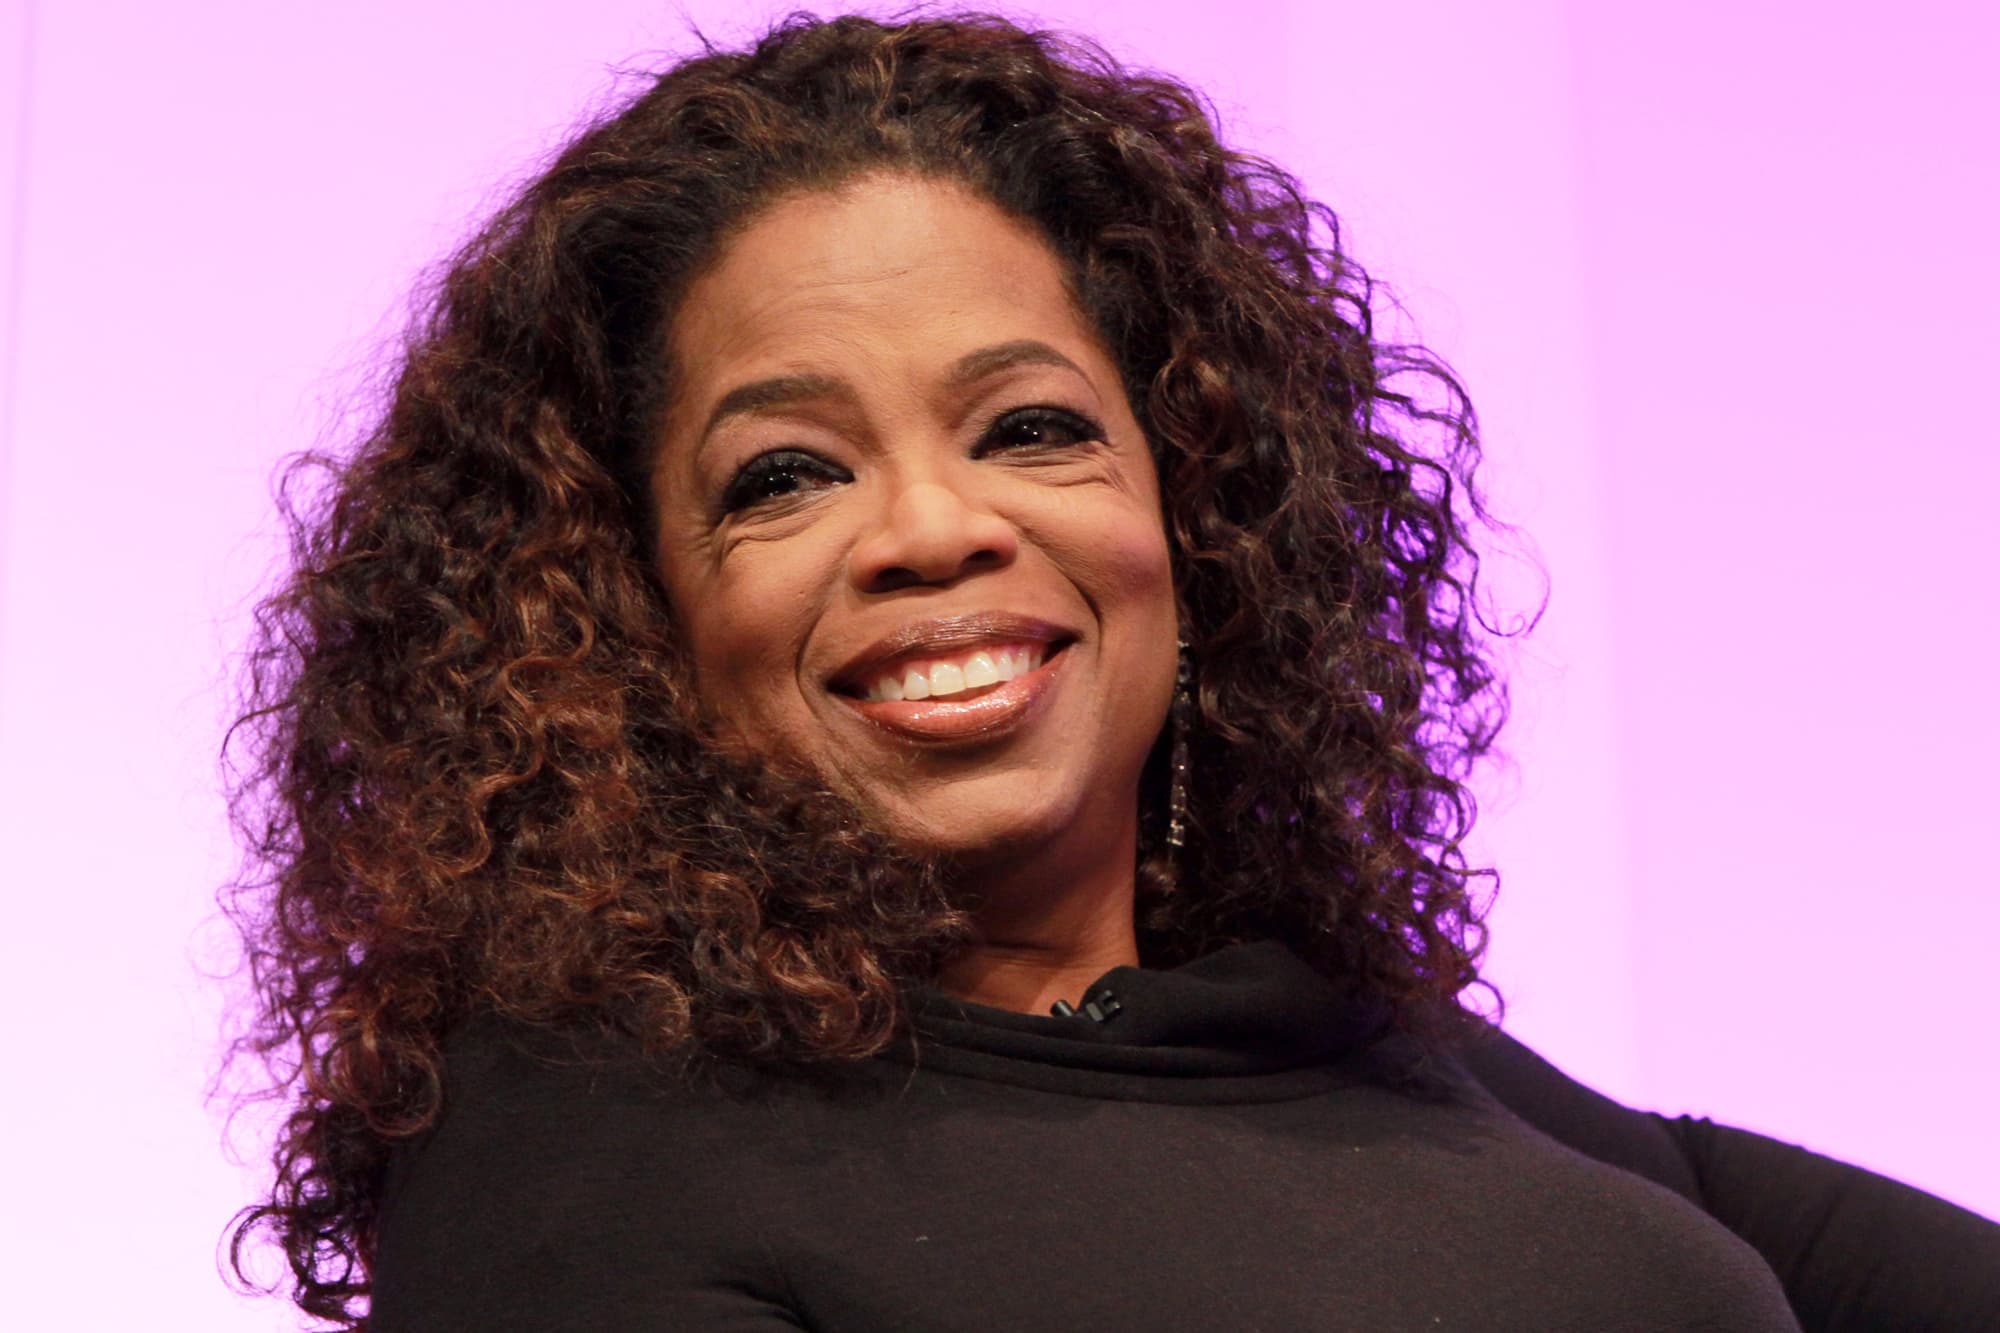 Oprah Winfrey - Compassion - Character and Leadership